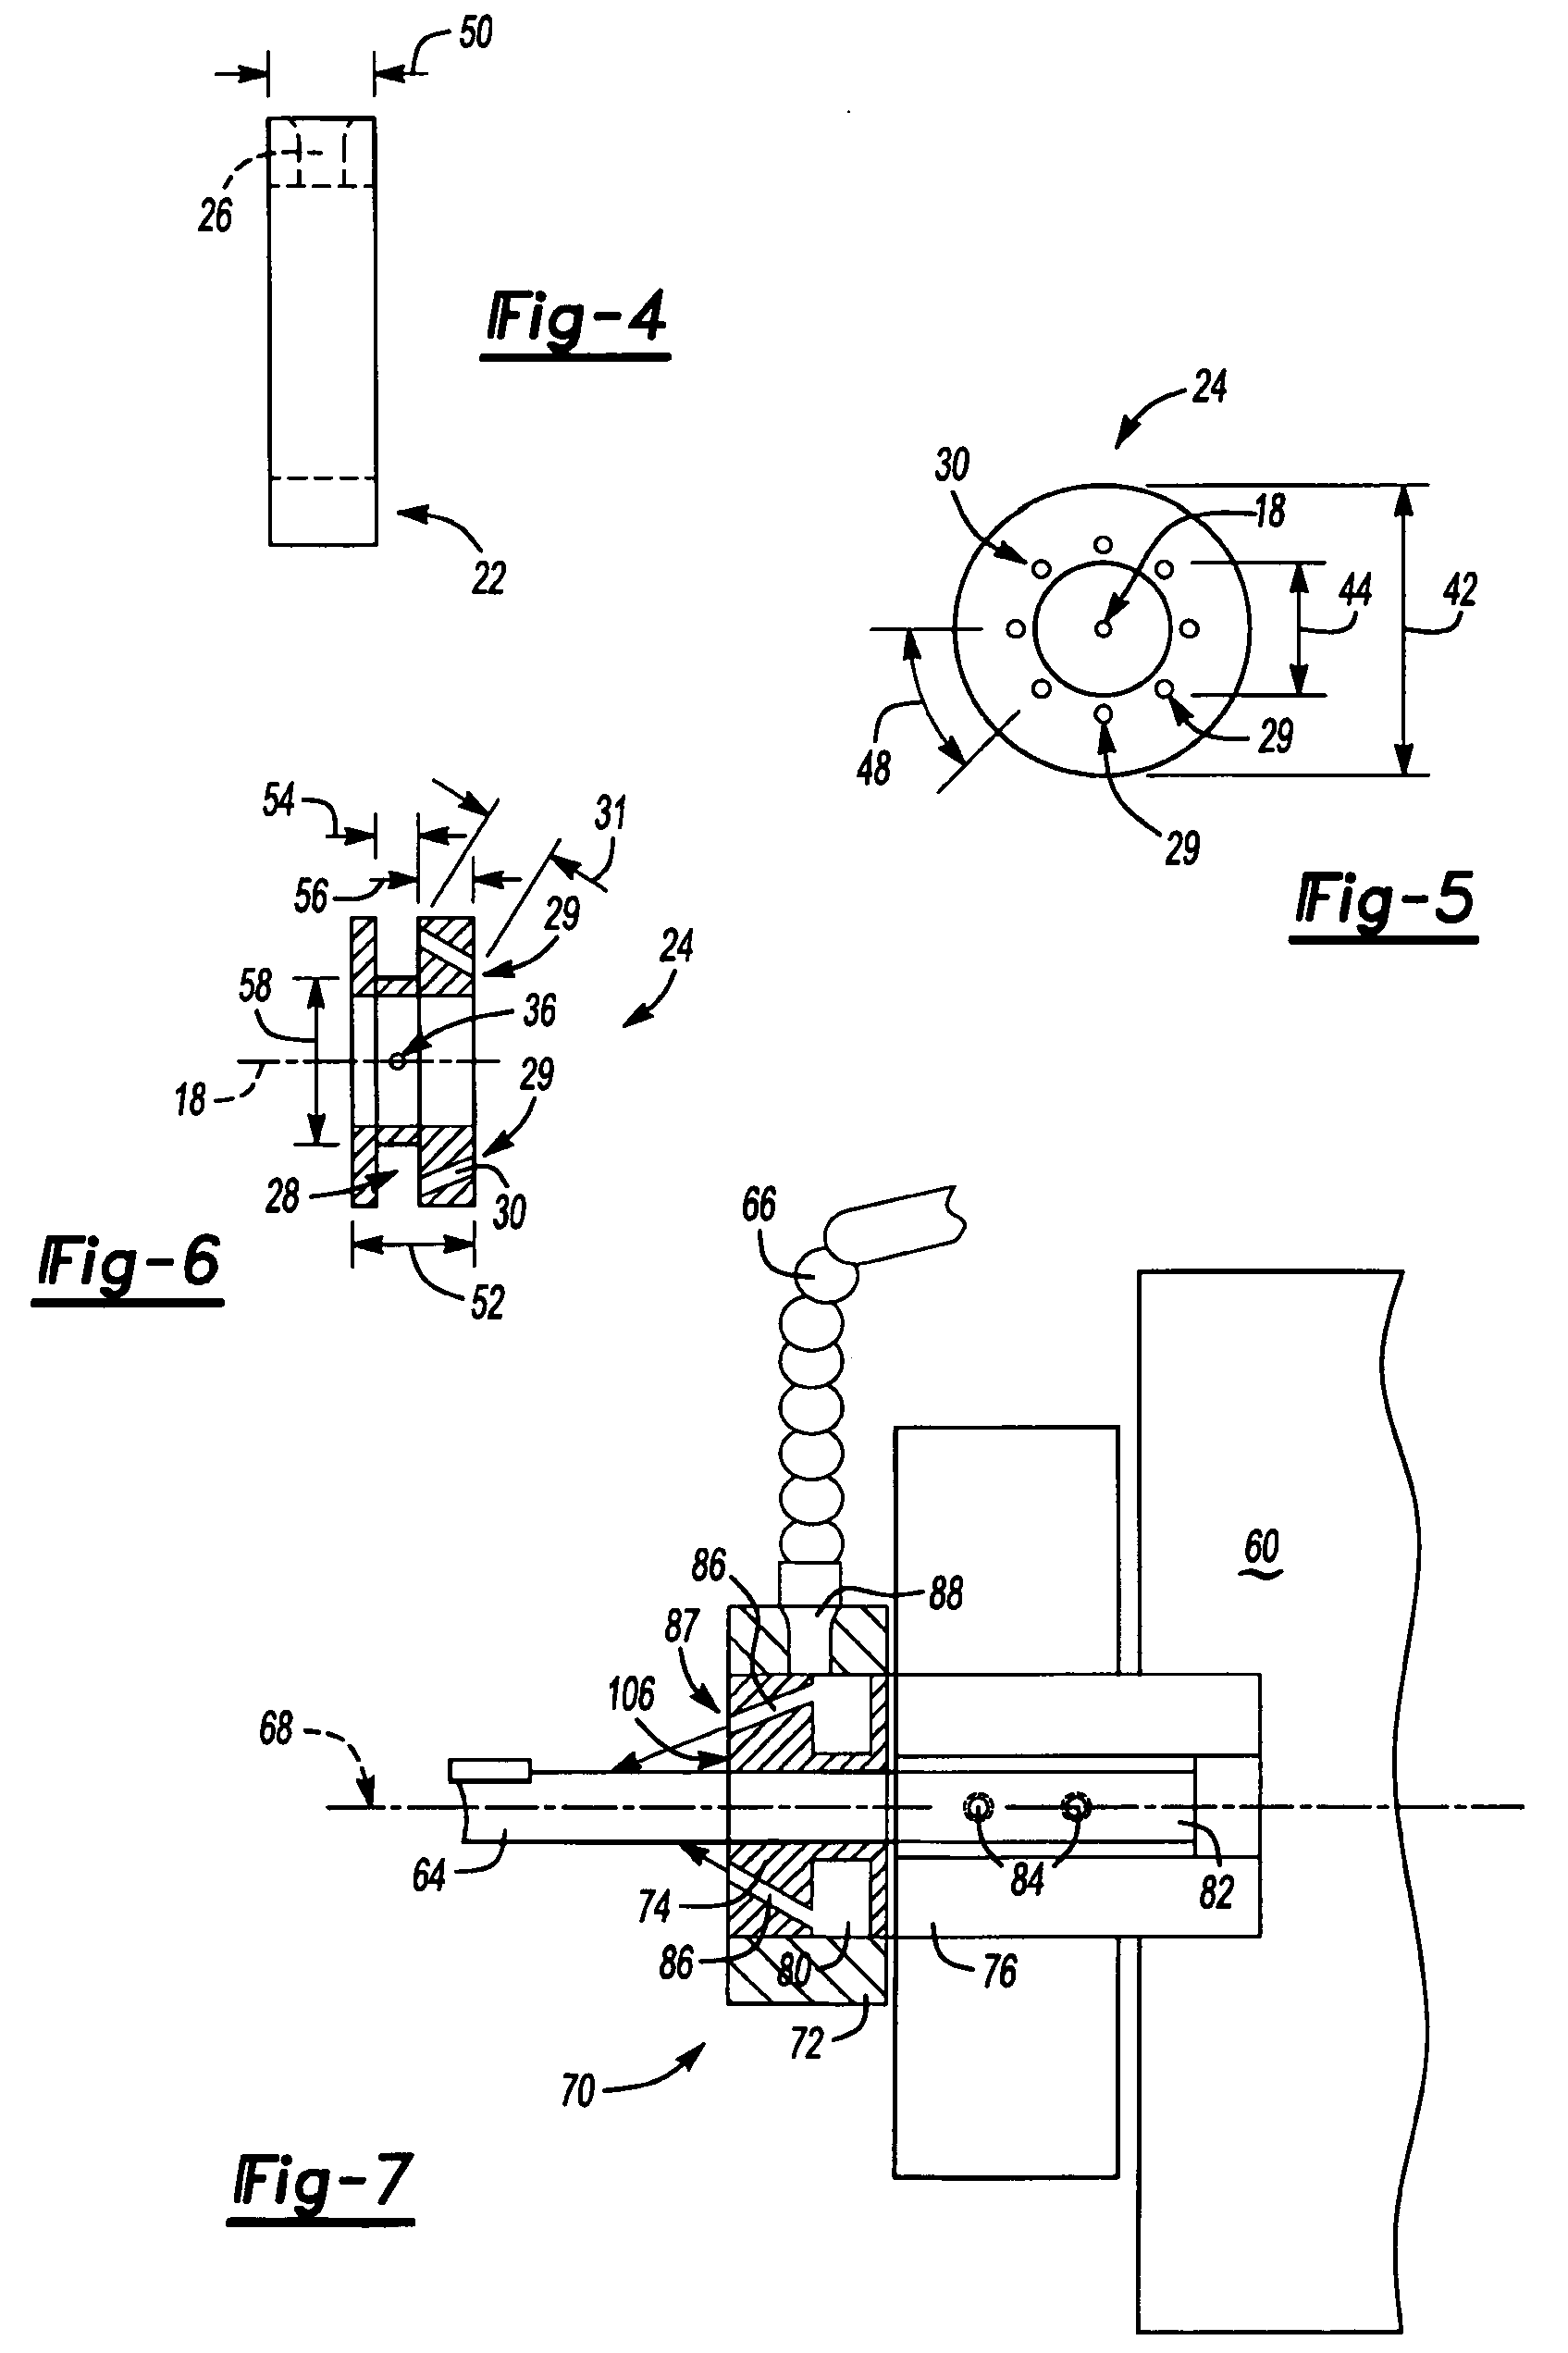 Tool coolant application and direction assembly